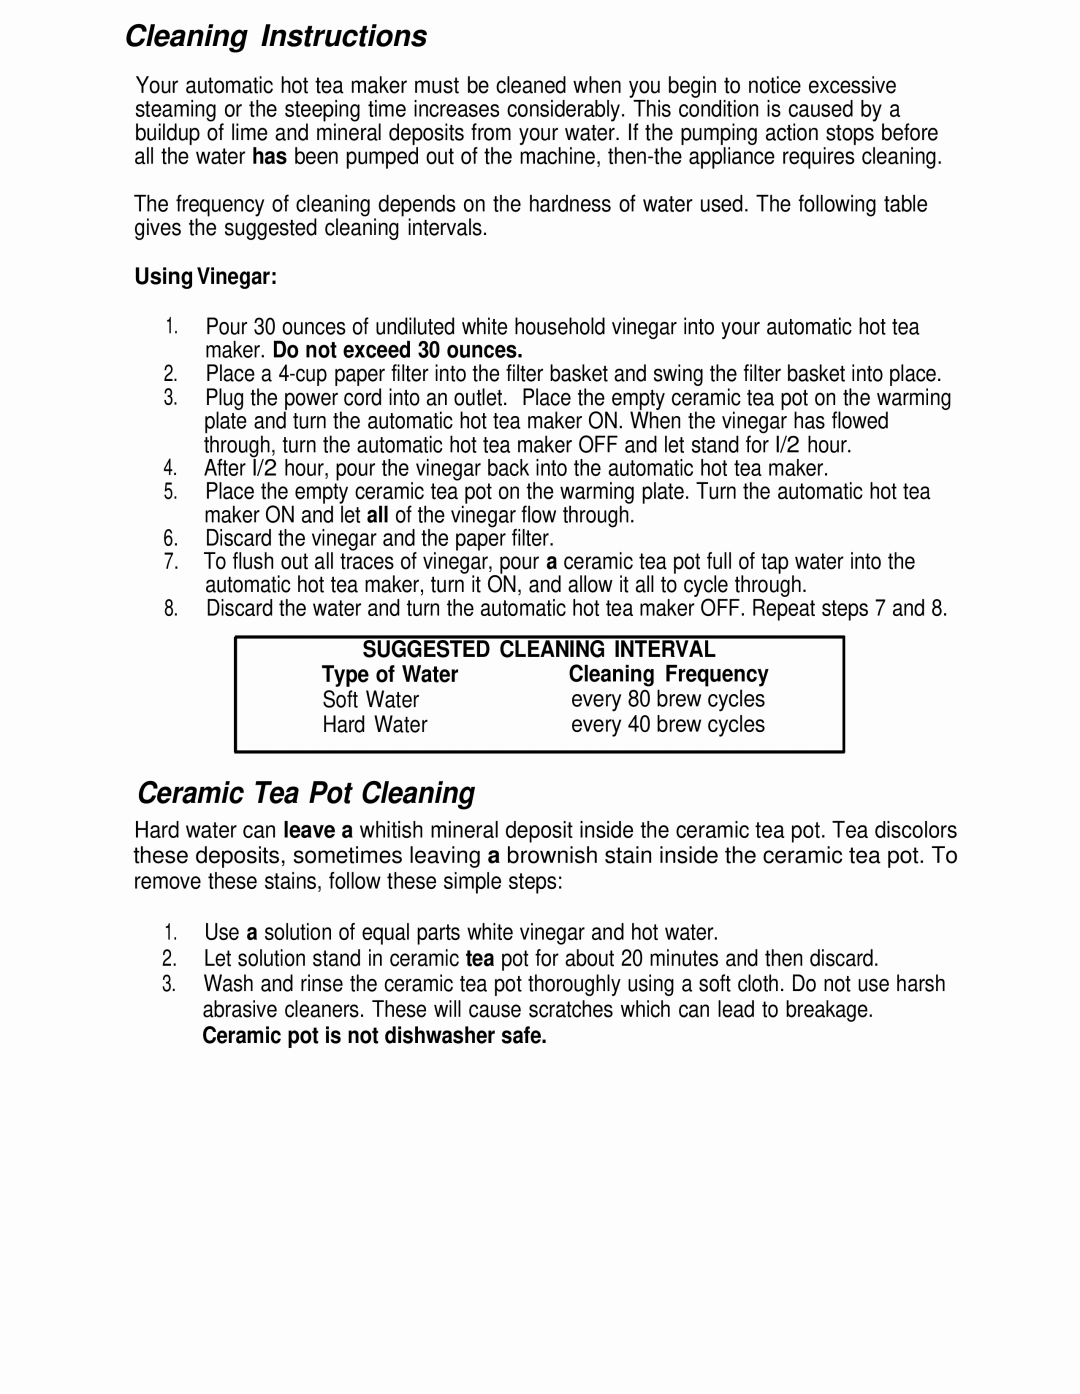 Sunbeam Mrs. Tea, HTM1 Cleaning Instructions, Ceramic Tea Pot Cleaning, Using Vinegar, Suggested Cleaning Interval 